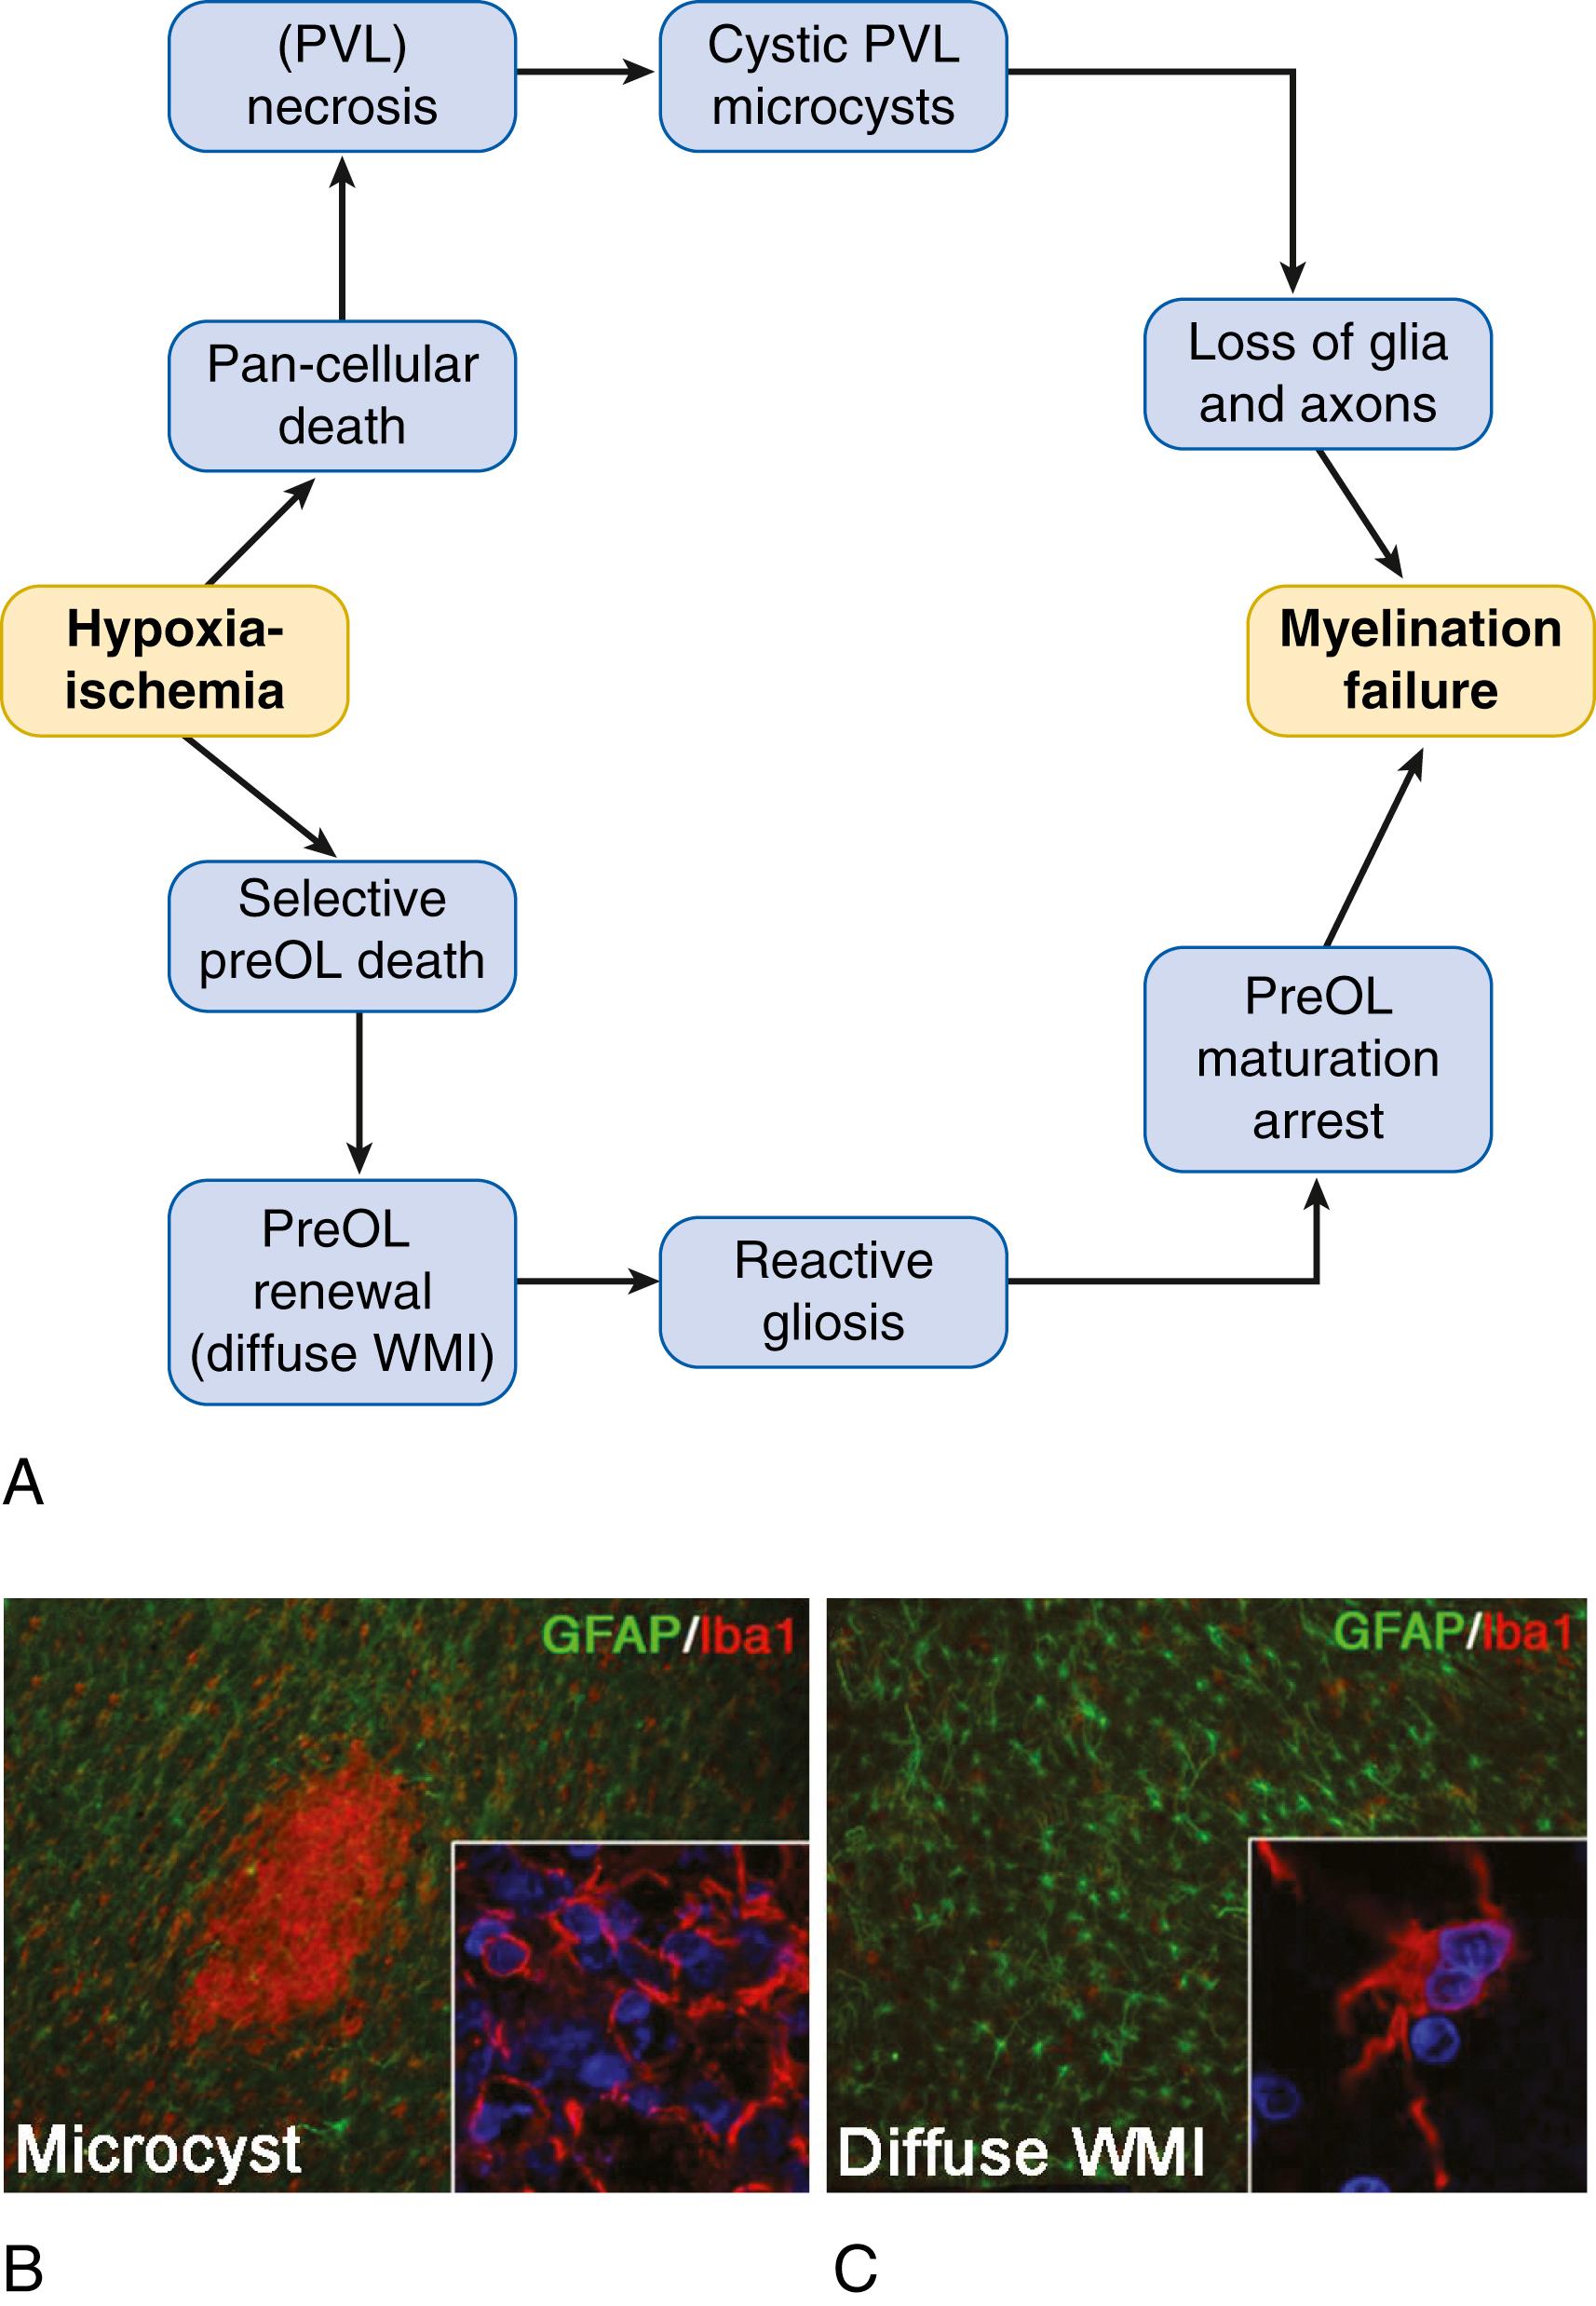 Fig. 132.1, (A) Distinctly different pathogenetic mechanisms mediate abnormal myelination in necrotic lesions (periventricular leukomalacia [PVL] ; upper pathway) compared with lesions with diffuse white matter injury (WMI; lower pathway) . Hypoxia-ischemia (H-I) is illustrated as one potential trigger for WMI. More severe H-I triggers white matter necrosis (upper pathway) that depletes the white matter of all cells. Severe necrosis results in cystic PVL, whereas milder necrosis results in microcysts. Milder H-I (lower pathway) selectively triggers death of premyelinating oligodendrocyte (preOLs) that are rapidly regenerated but blocked from maturation by astrocytes-derived factors. Note that the lower pathway is the dominant one in most contemporary preterm neonates, whereas the minor upper pathway reflects the declining burden of white matter necrosis that has accompanied advances in neonatal intensive care. (B) A typical microscopic necrotic lesion containing reactive microglia and macrophages (red cells and inset) and rare astrocytes (green cells) . Nuclei are blue . (C) Diffuse WMI is notable for reactive astrocytes (green cells) and a lesser population of microglia/macrophages (red cells) .